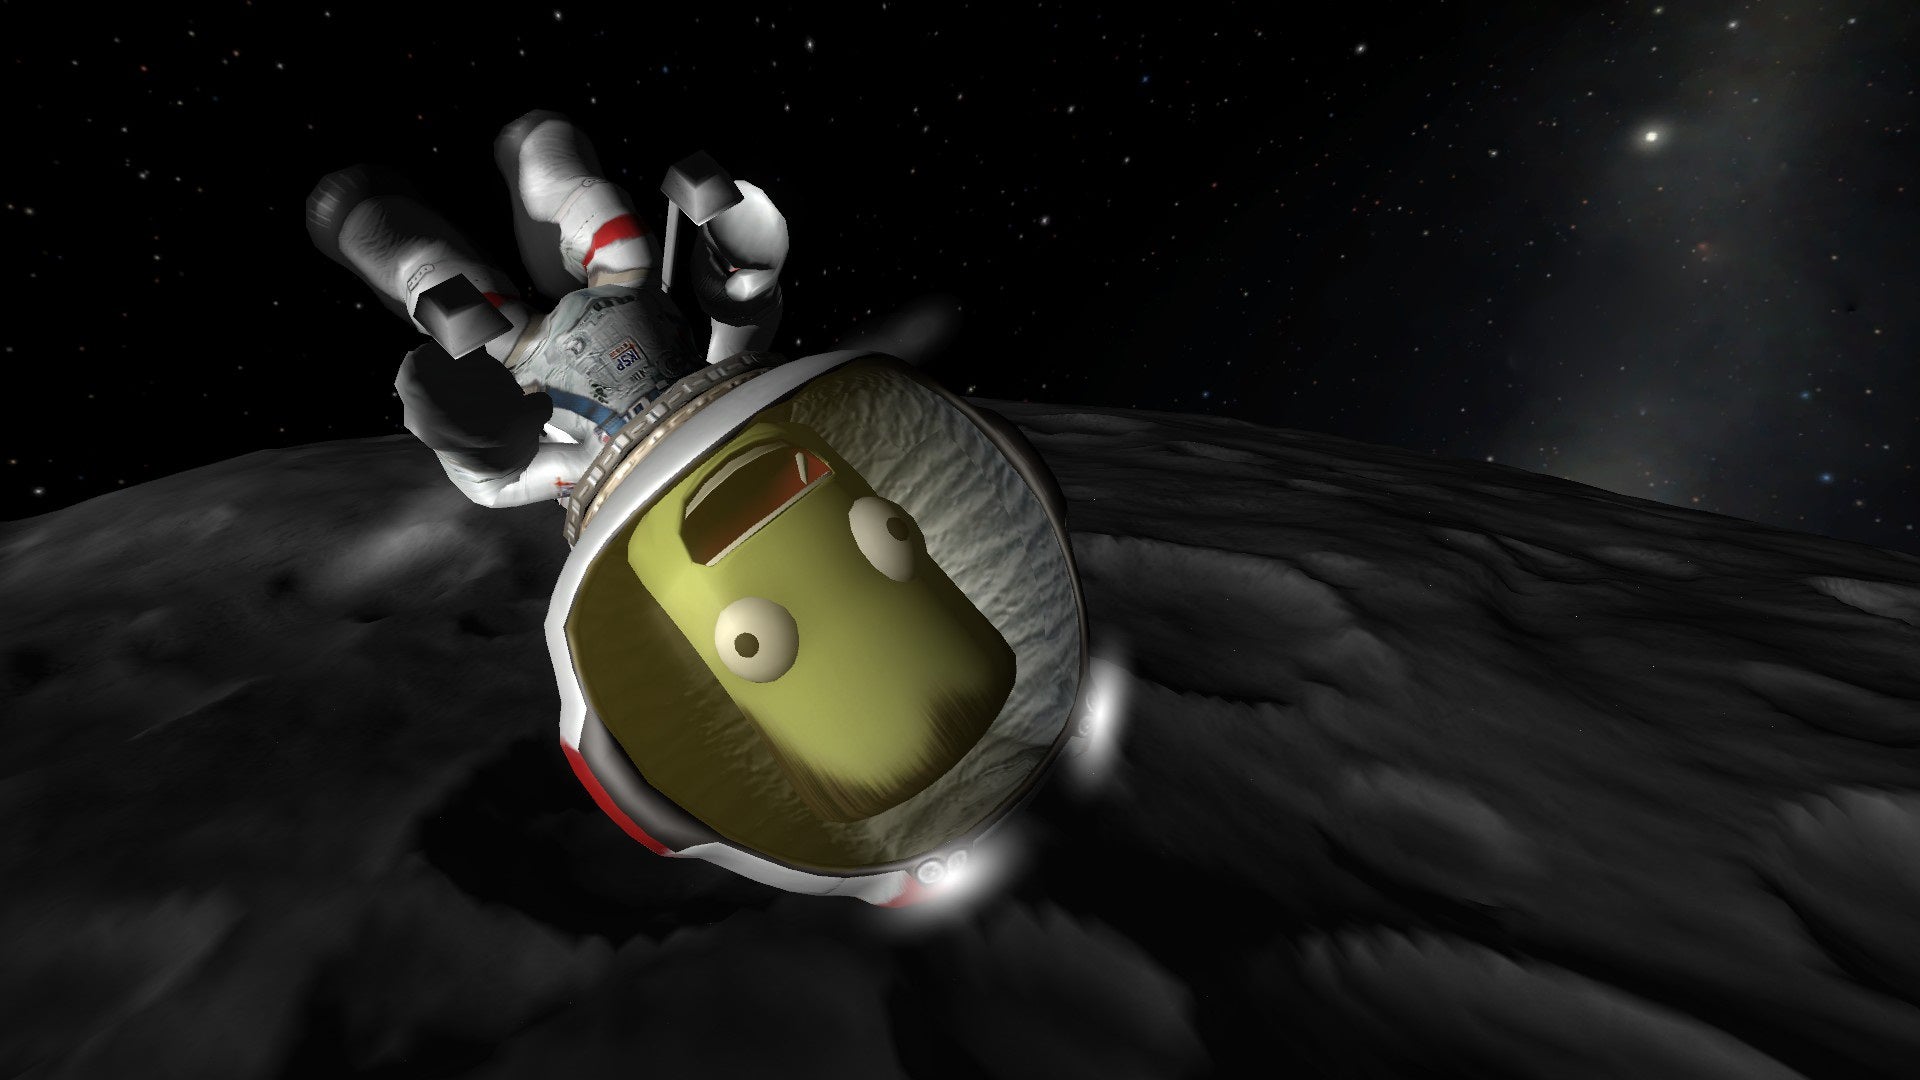 A screenshot of Kerbal Space Program showing a screaming, green Kerbal in a space suit, in the foreground, floating in space upside down.